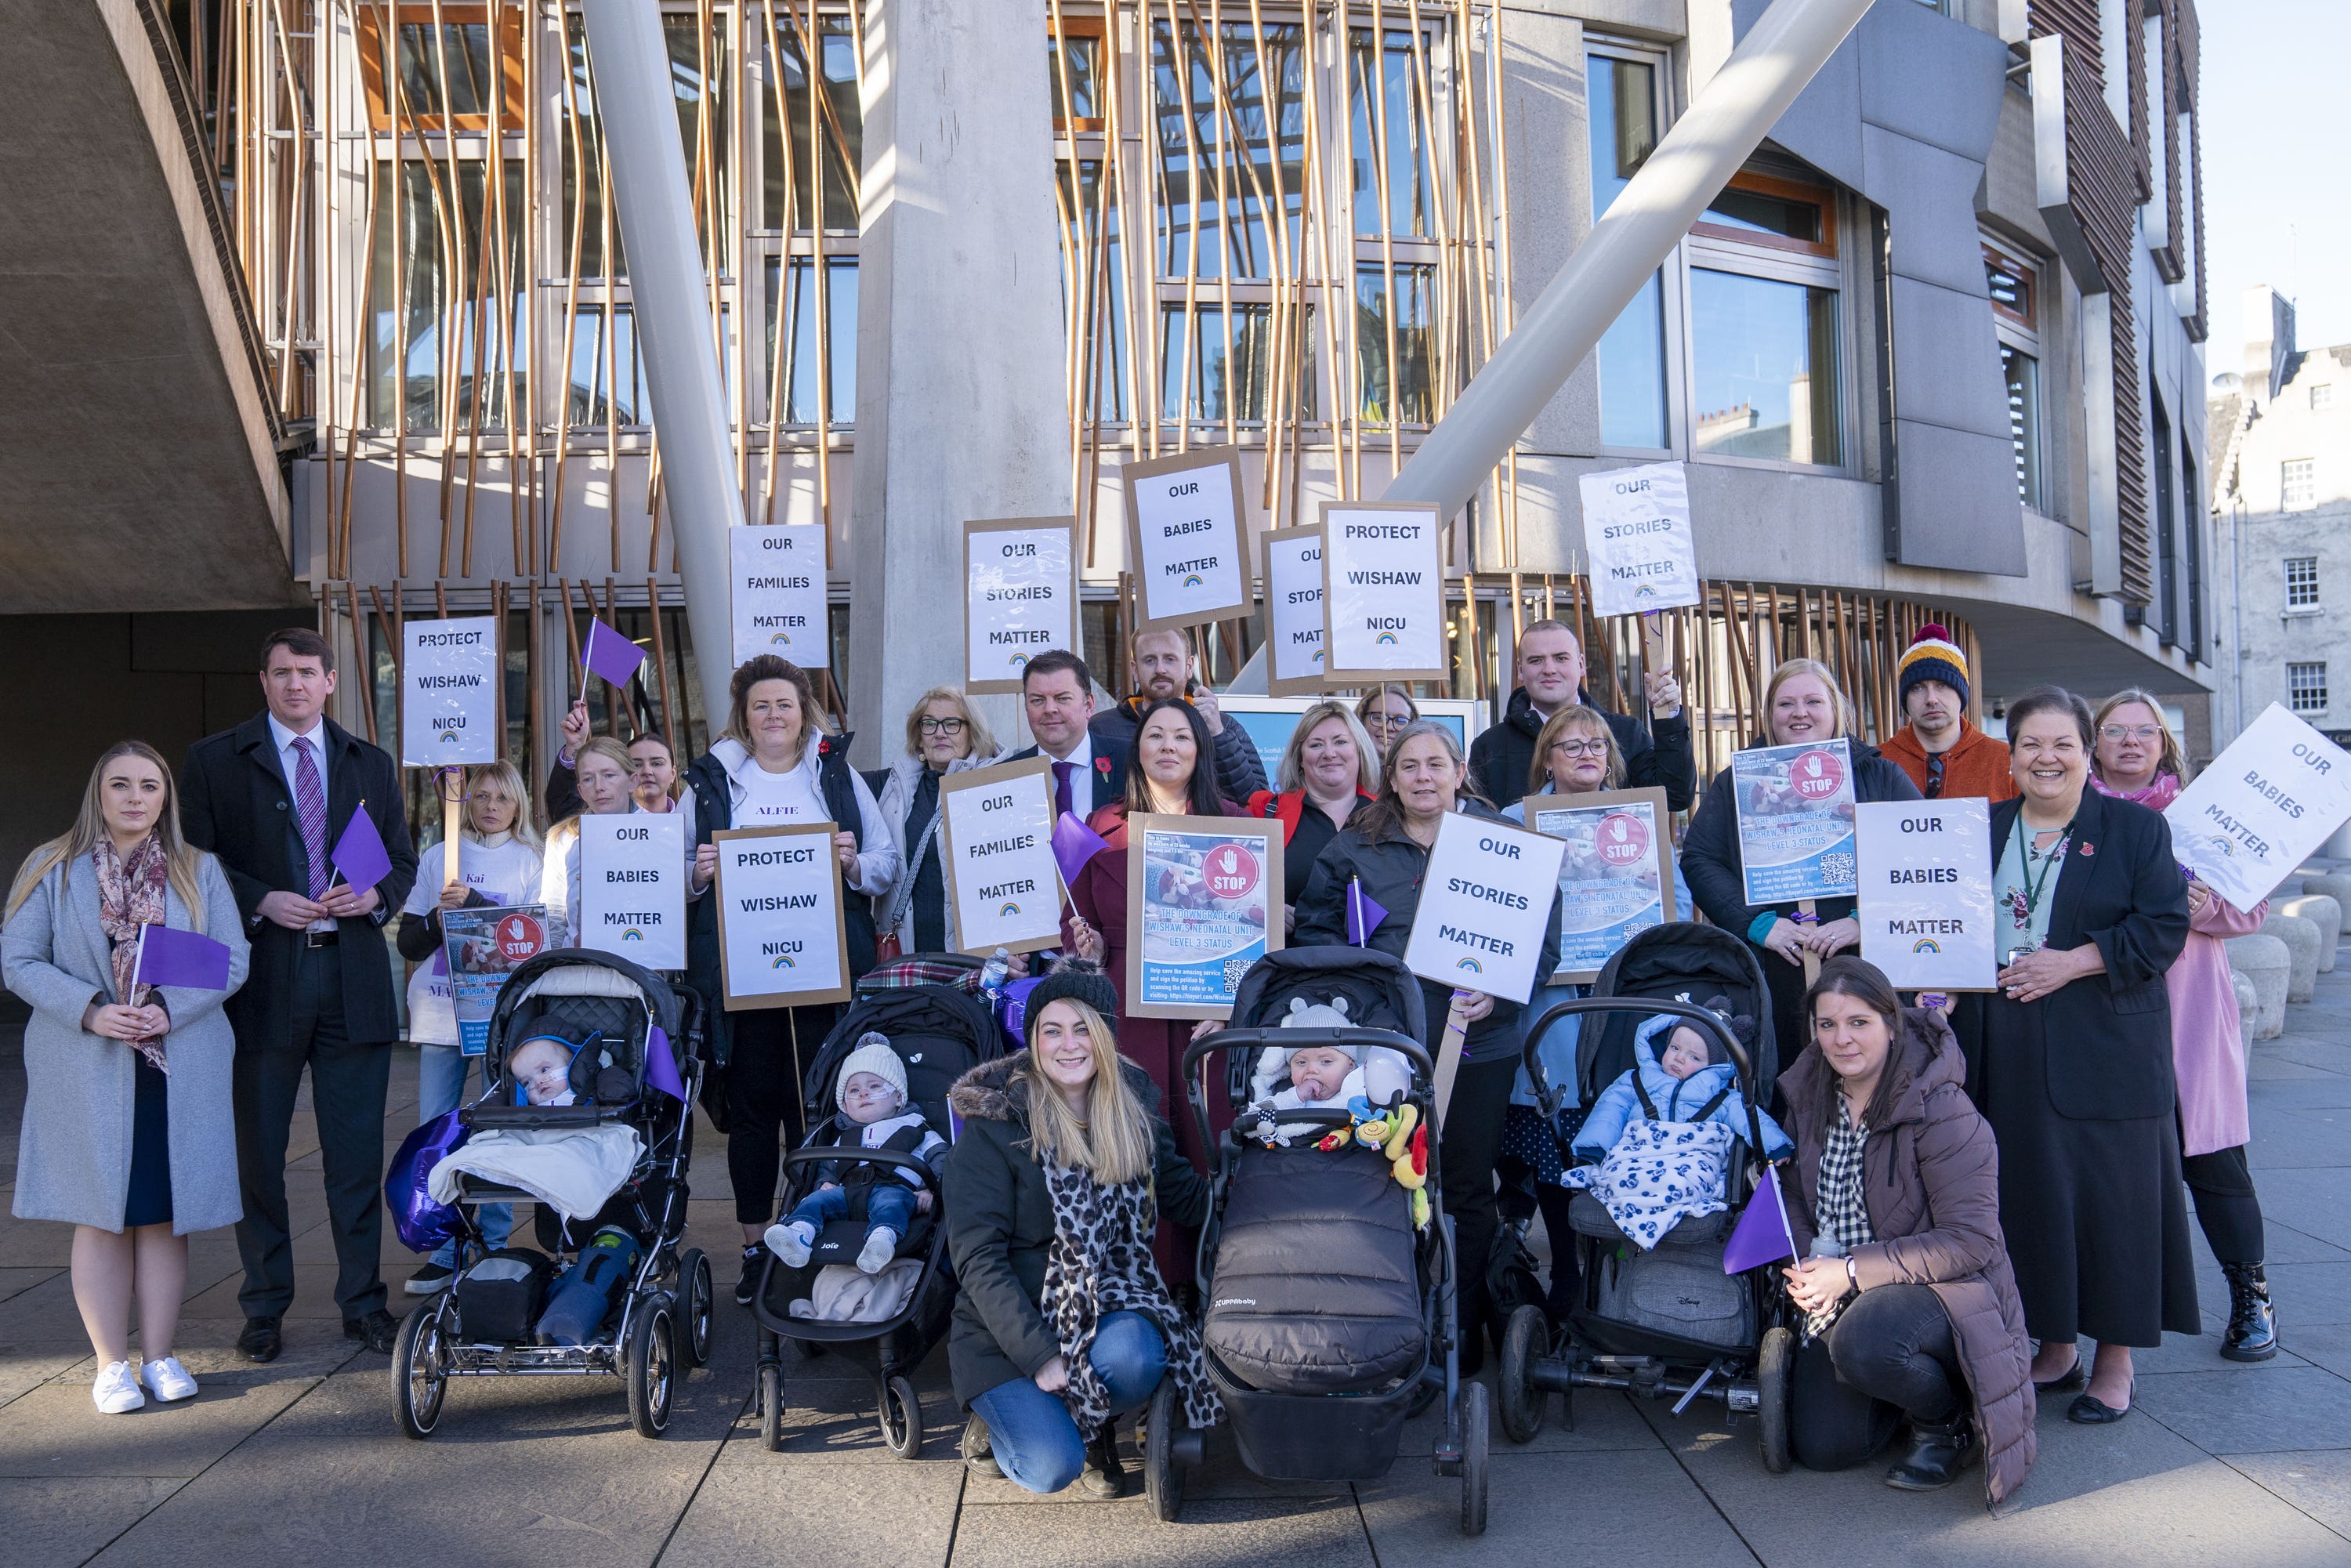 Mothers of premature babies take neonatal unit campaign to Holyrood
